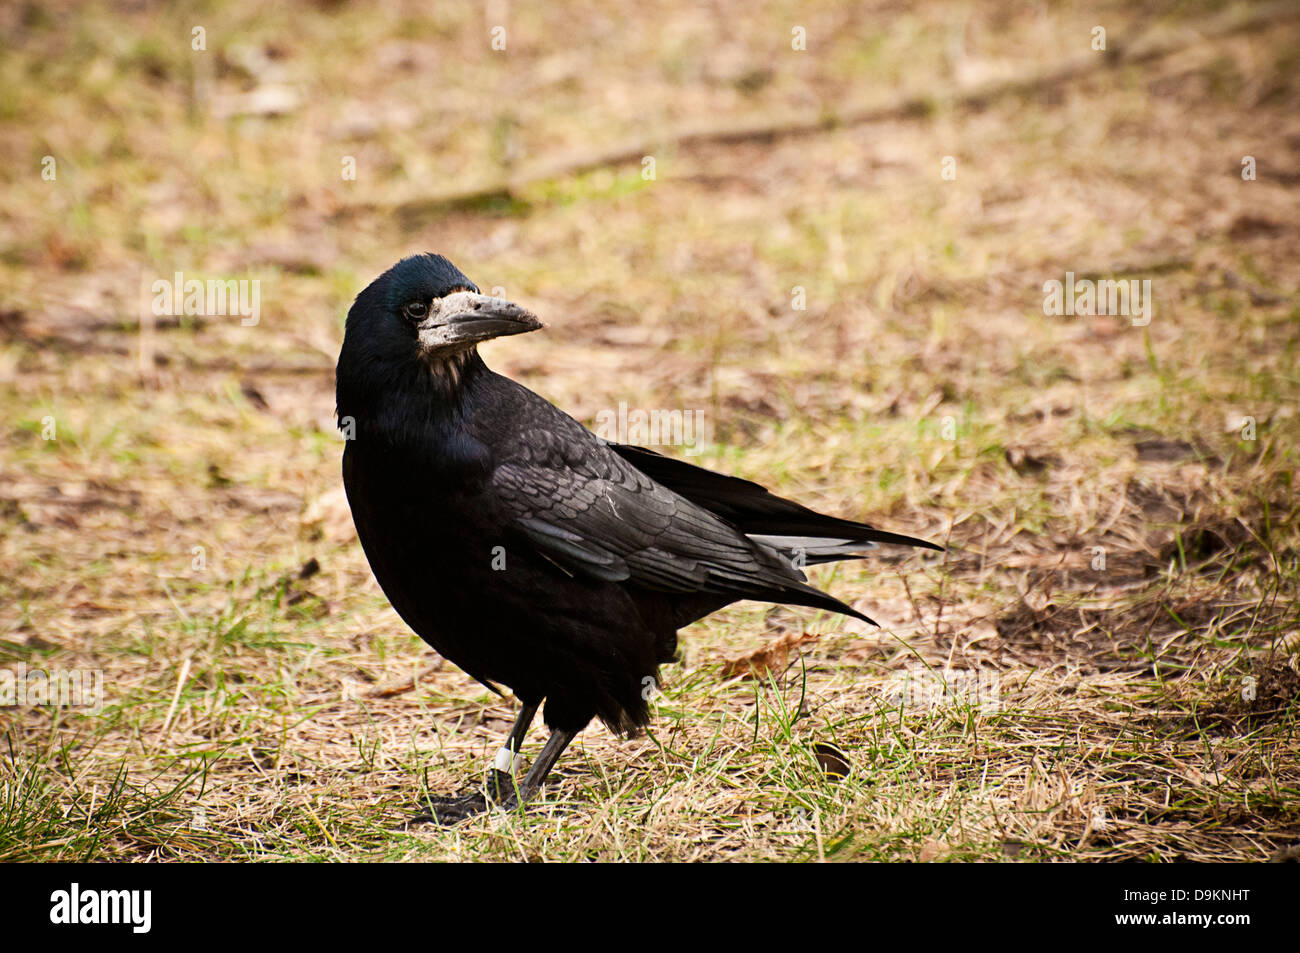 crow standing in grass Stock Photo